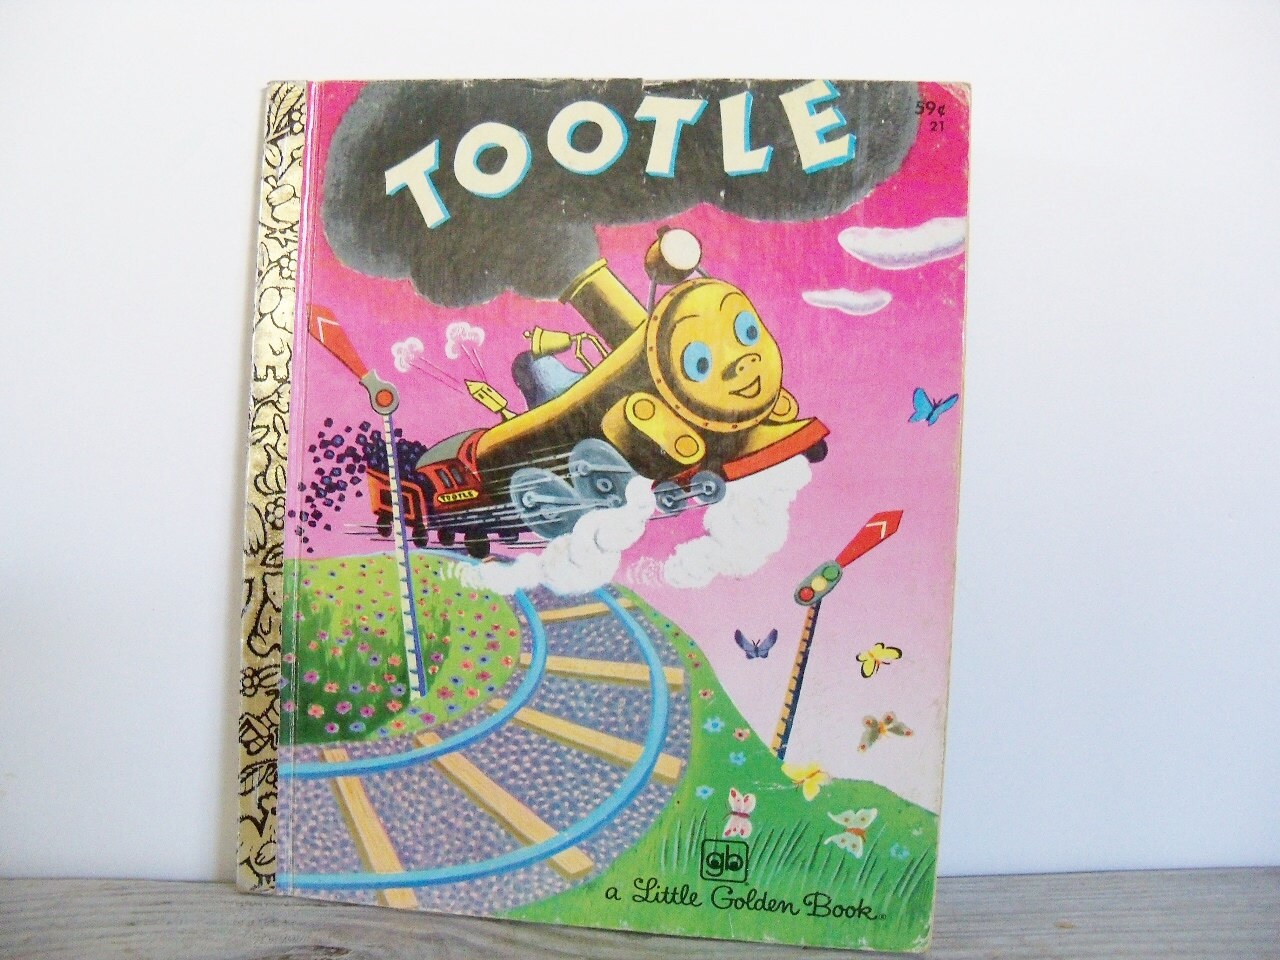 tootle by gertrude crampton